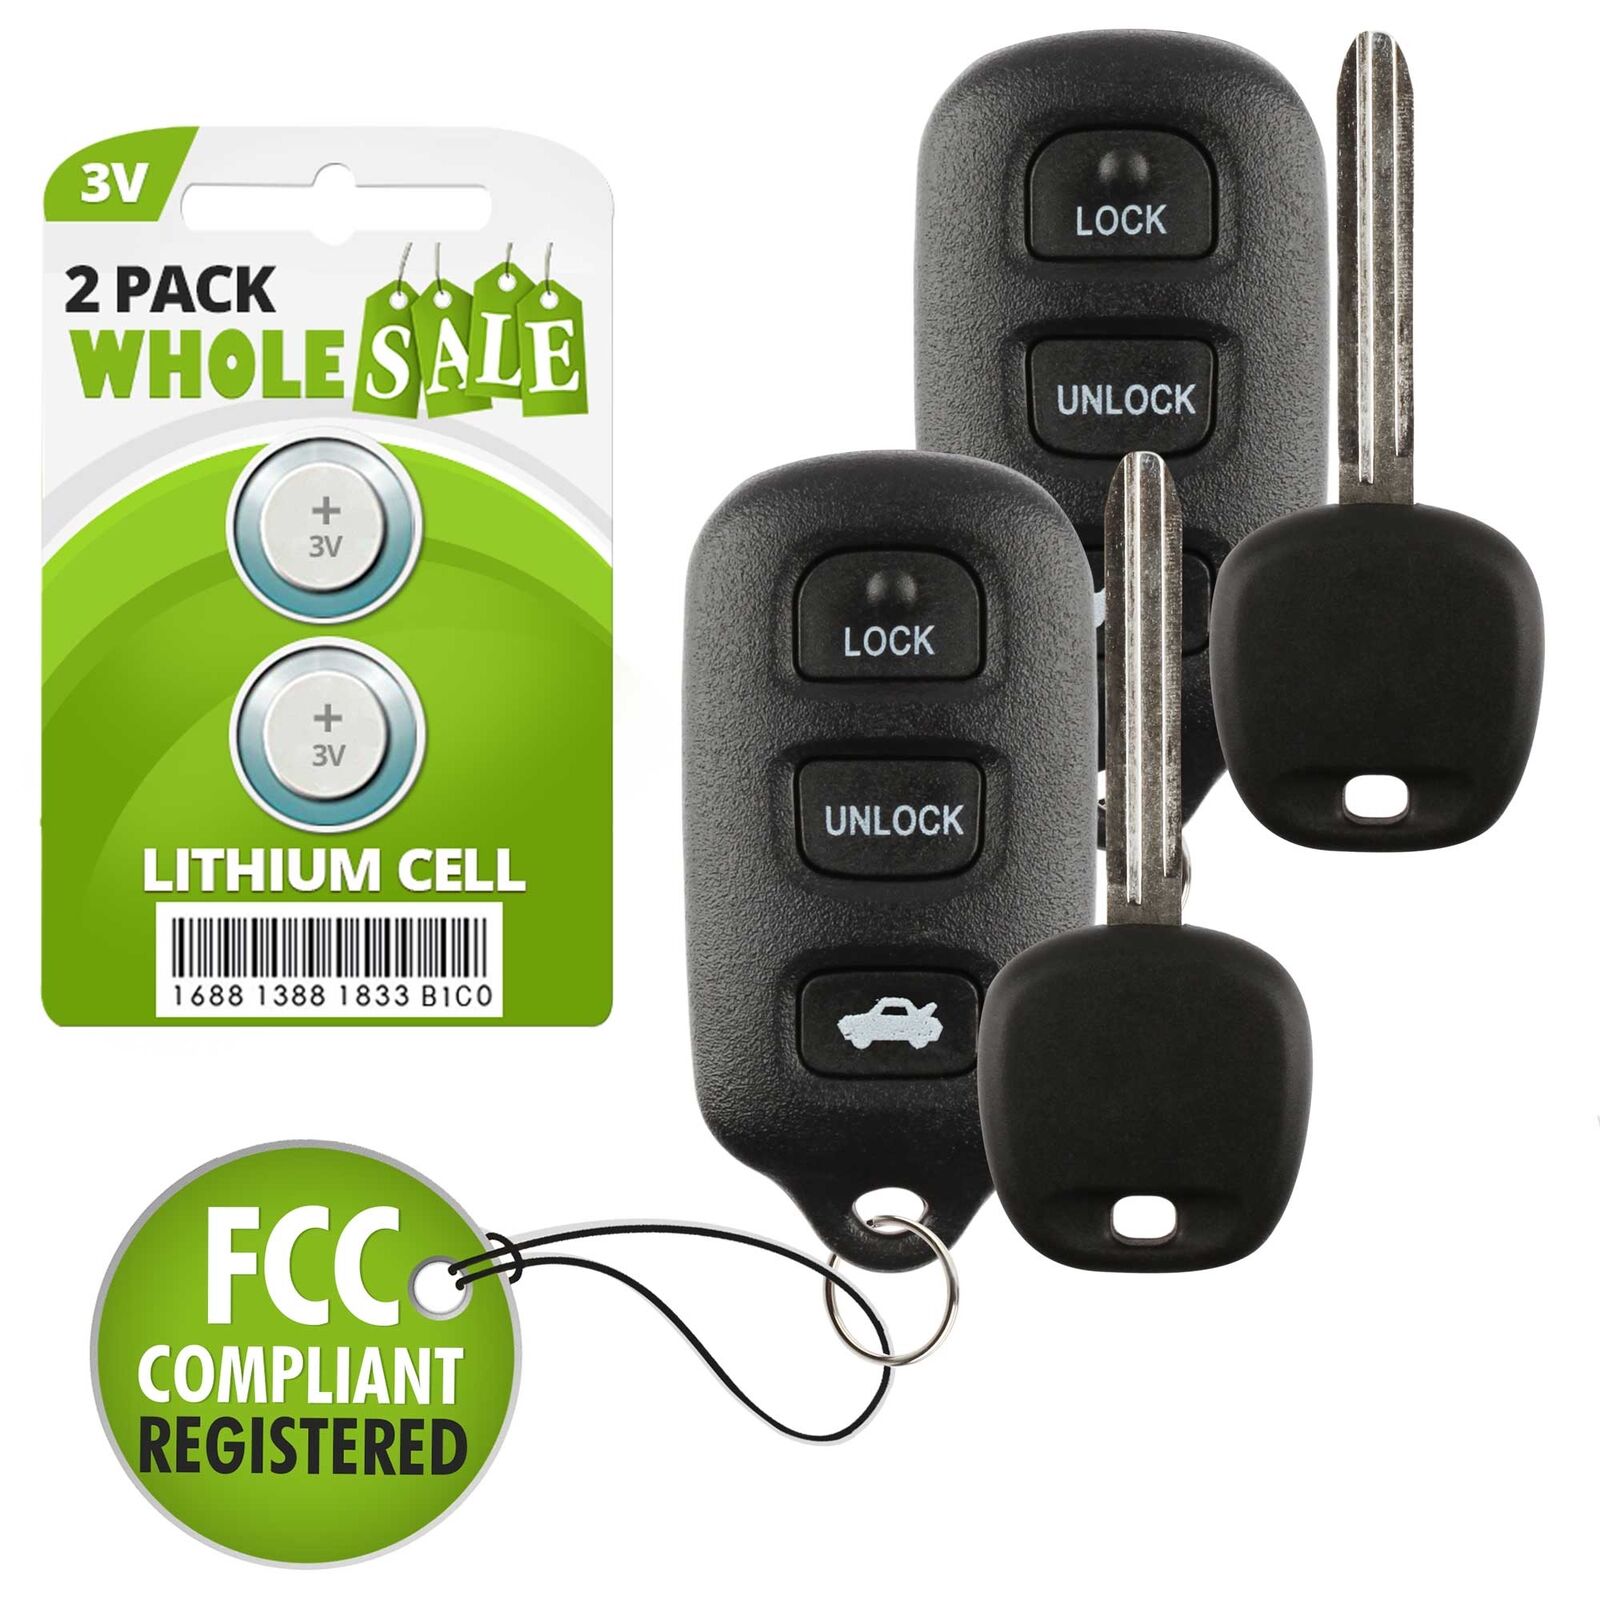 2 Replacement For 2003 2004 2005 2006 Toyota Camry 67 Key + Fob Remote